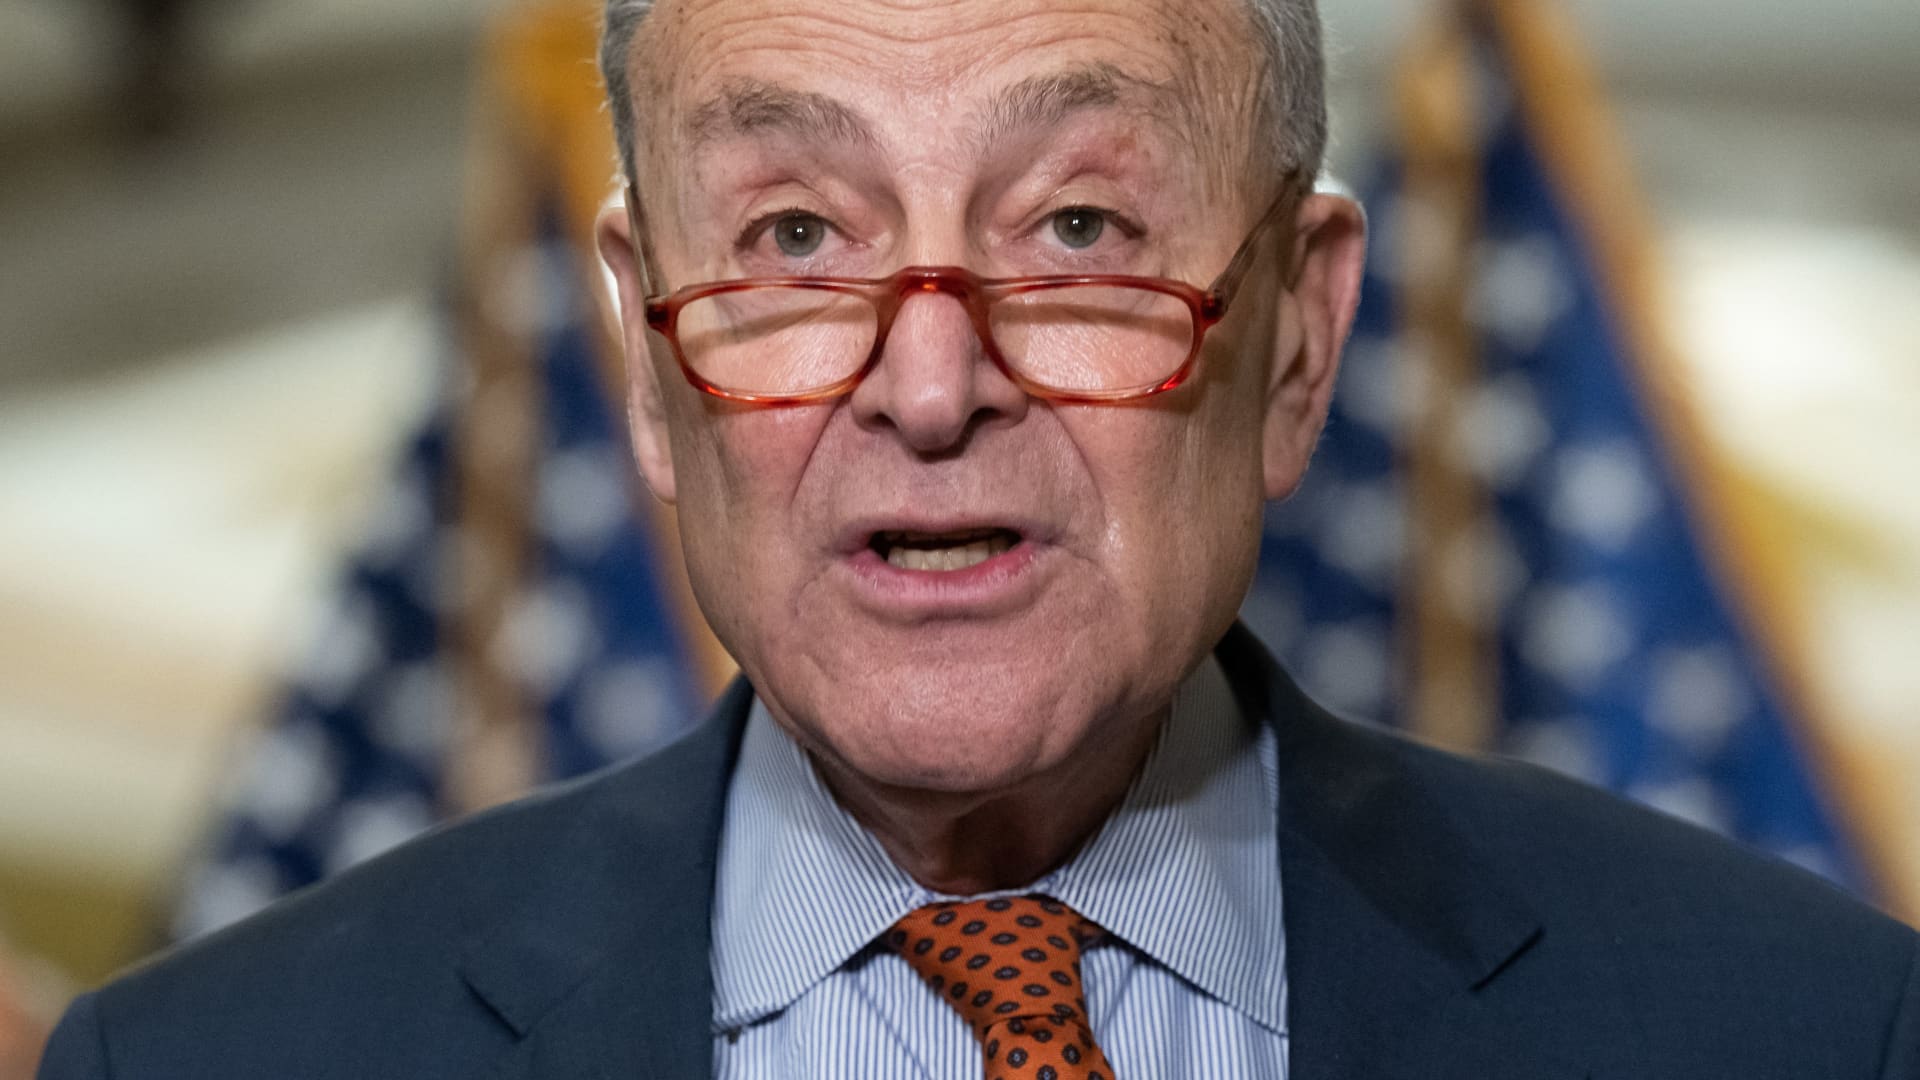 Schumer to host first of three senator-only A.I. briefings as Congress considers how to regulate